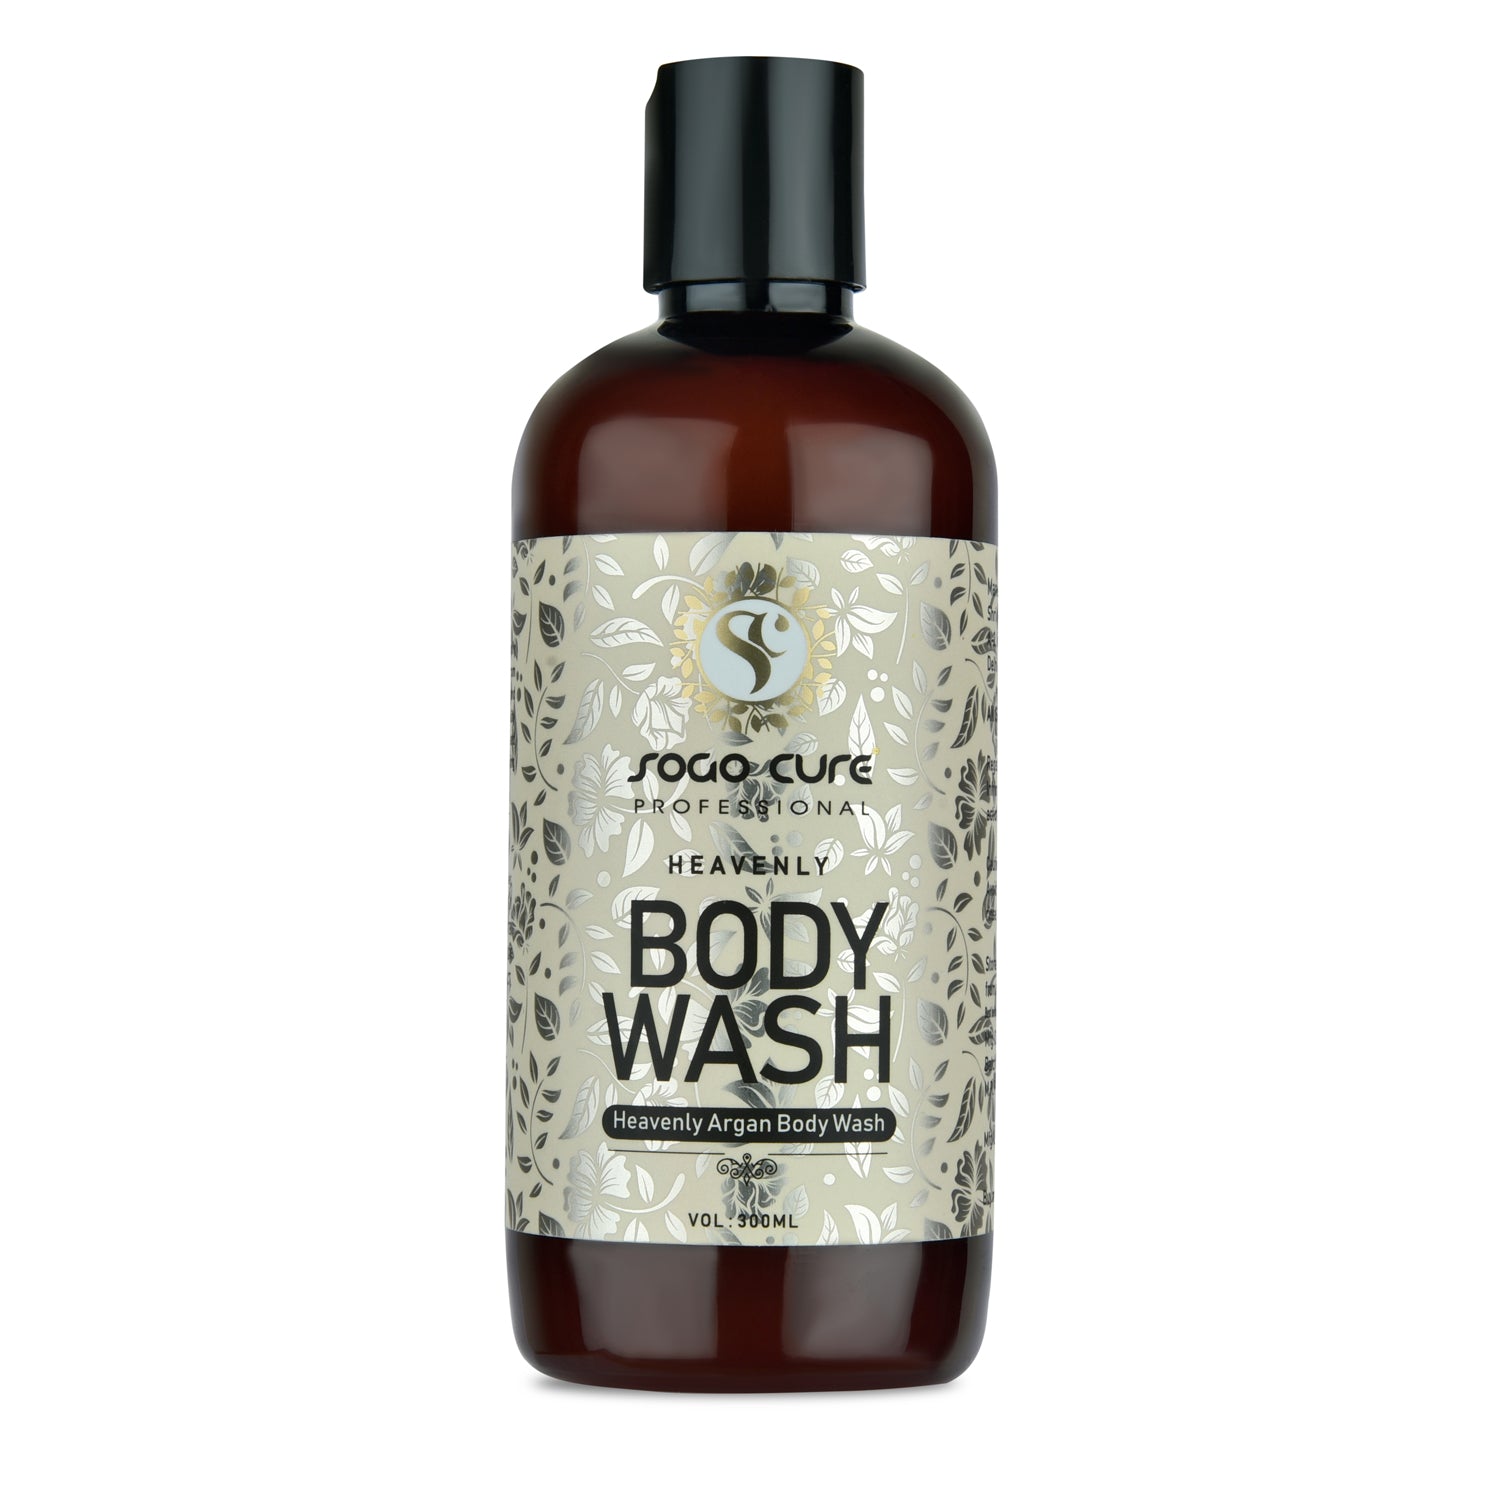 Body Wash Single Pump Bottle Essential Oil & Lemon Extracts for a Soft and Smooth Skin, pH Balanced Free of Parabens & Silicones Body Wash